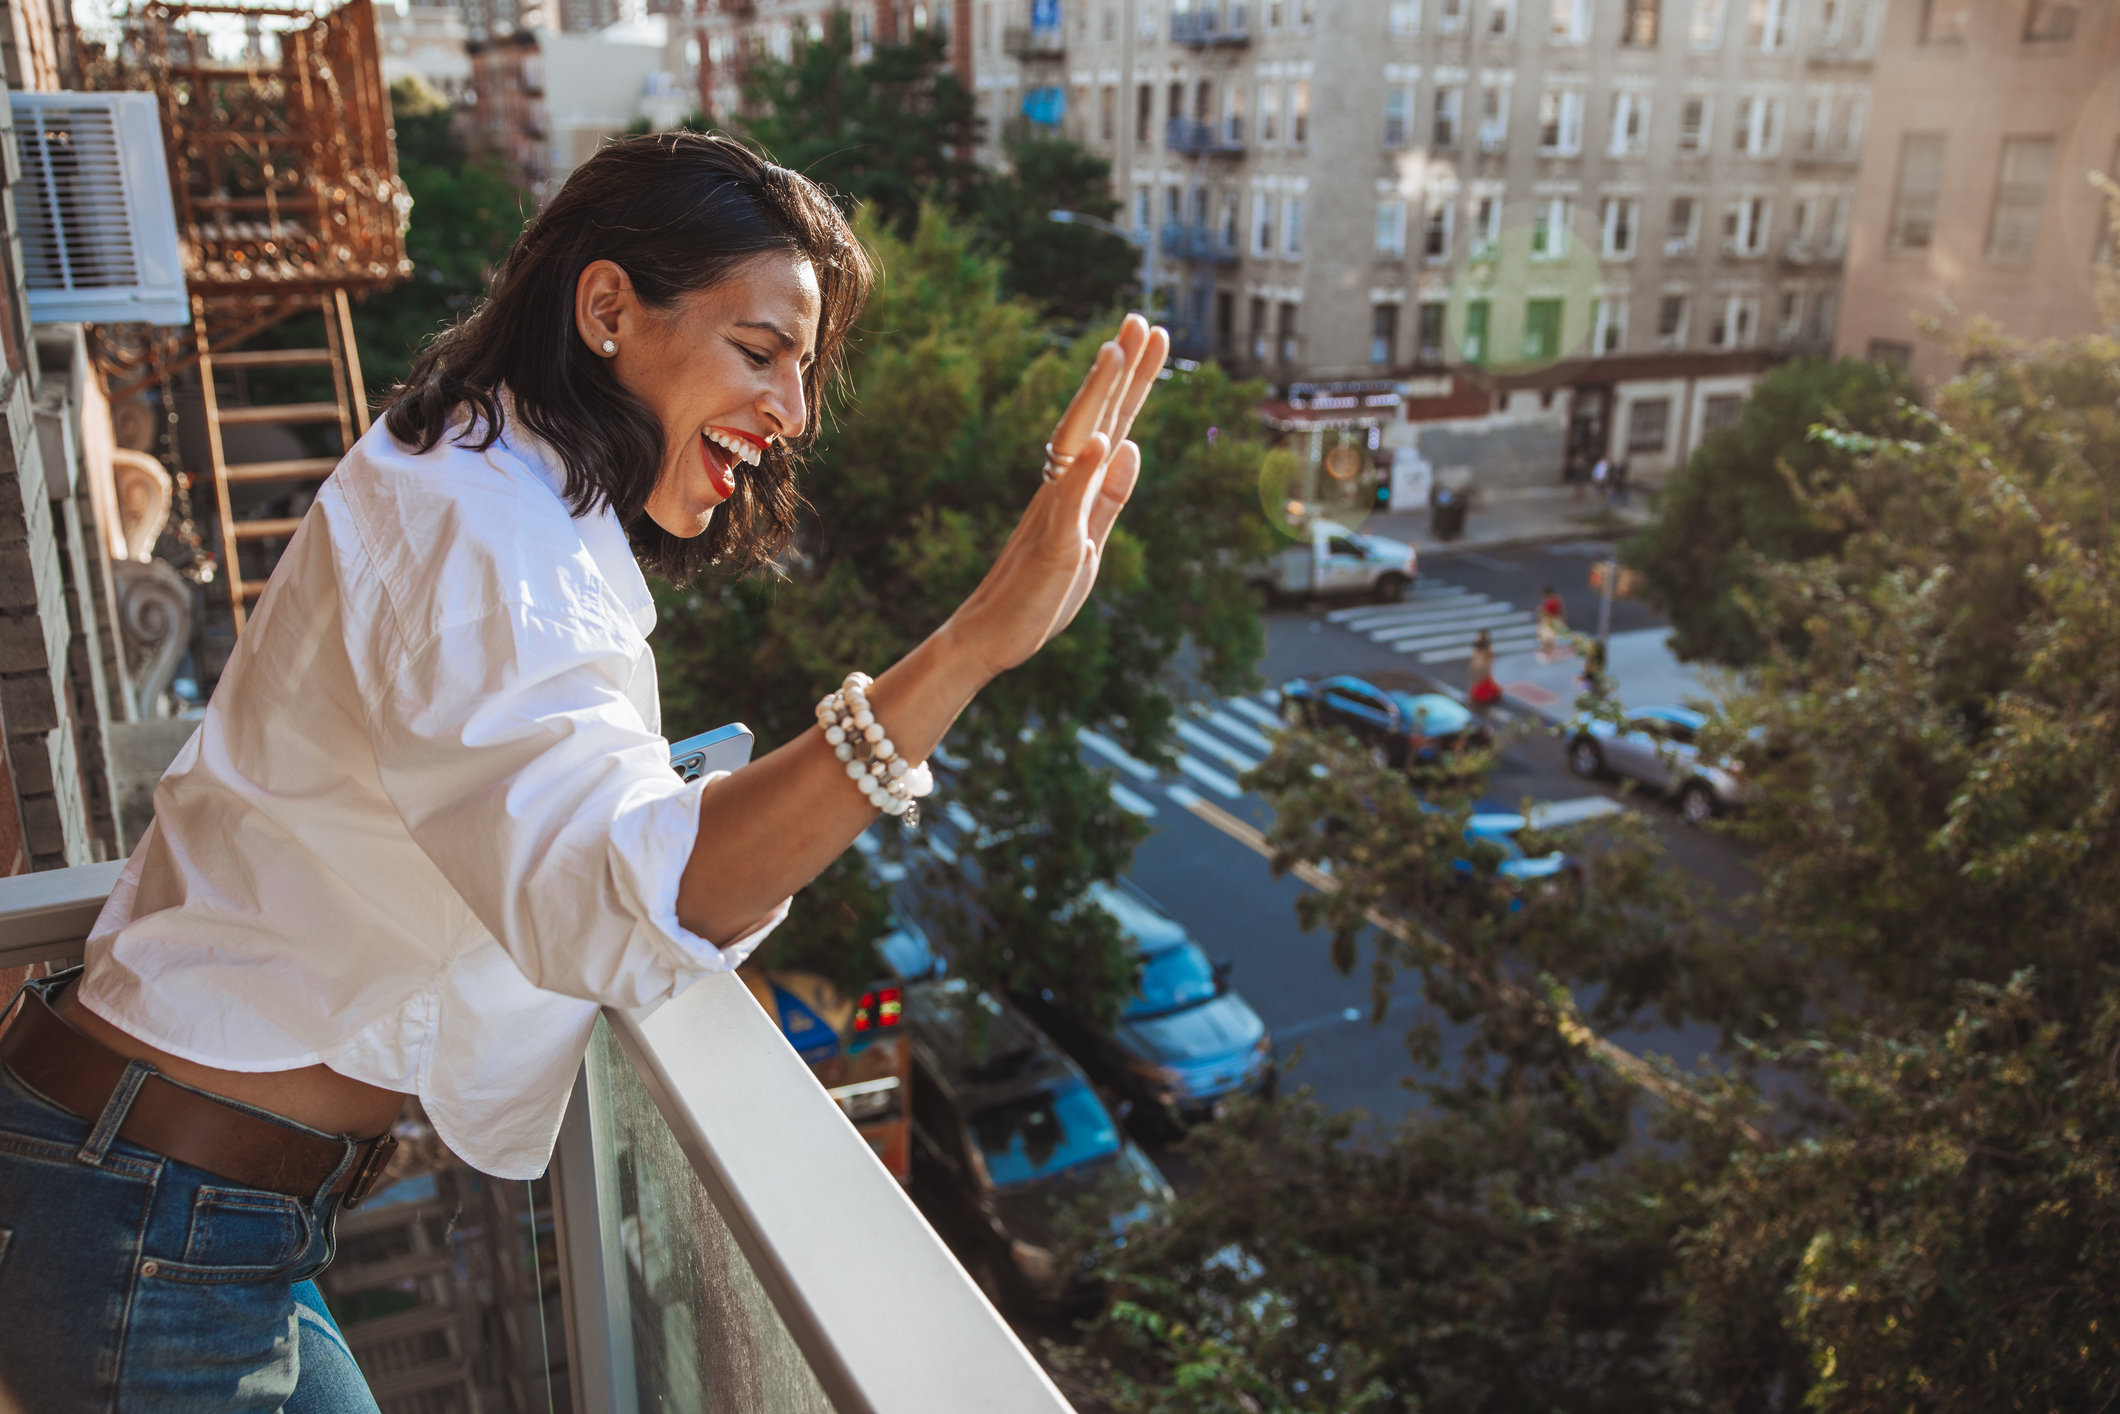 Woman on balcony waving to street below, wearing casual white blouse and jeans